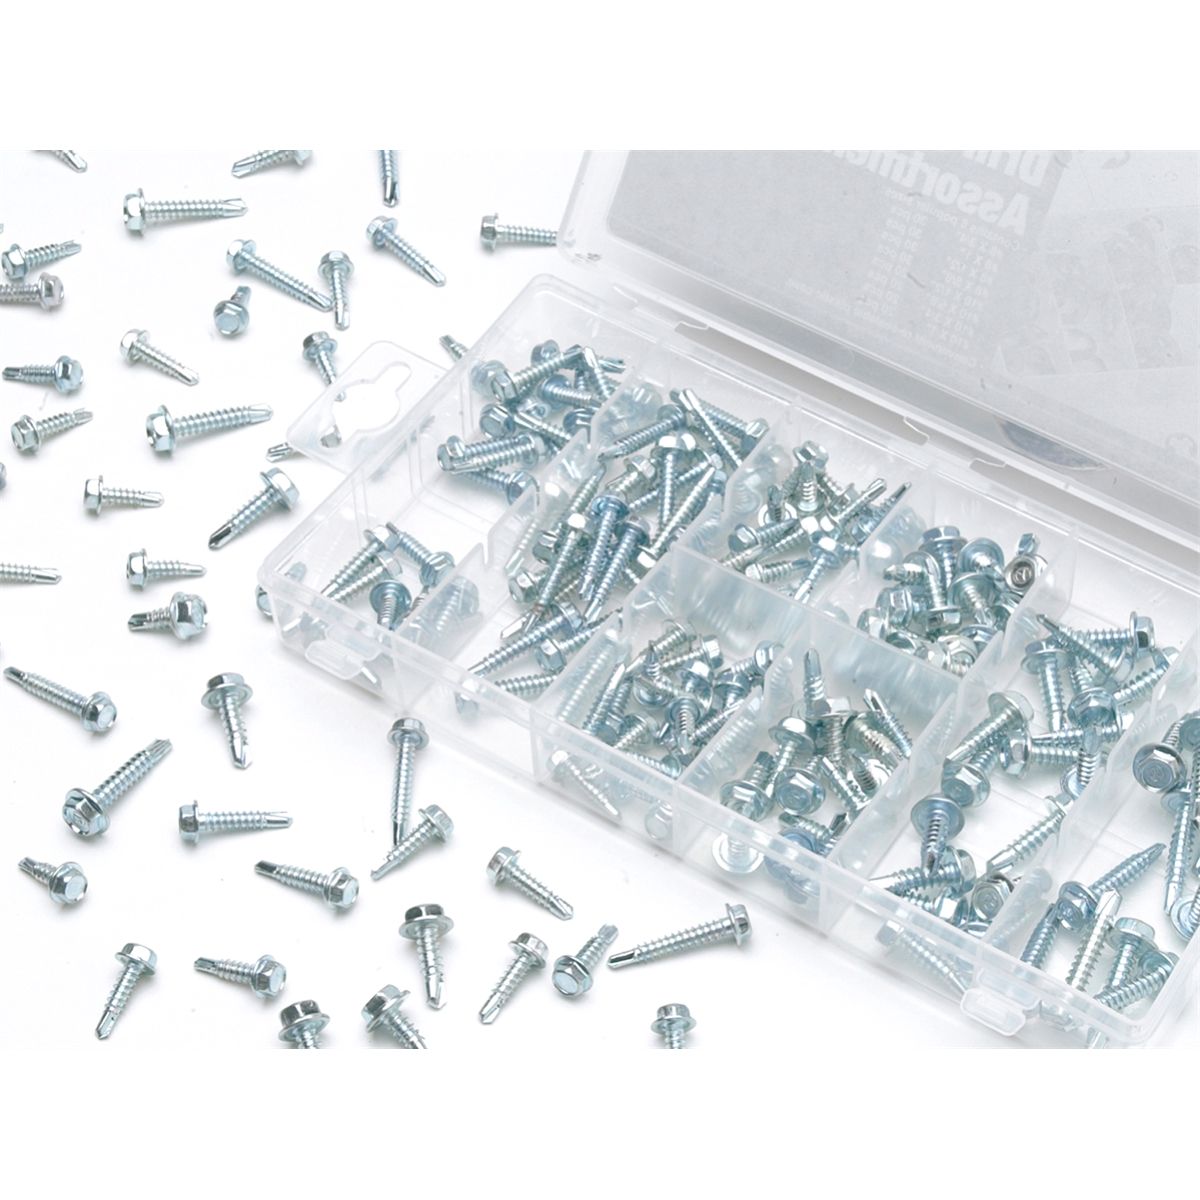 200 Piece Self Drilling Hex Washer Hardware Kit